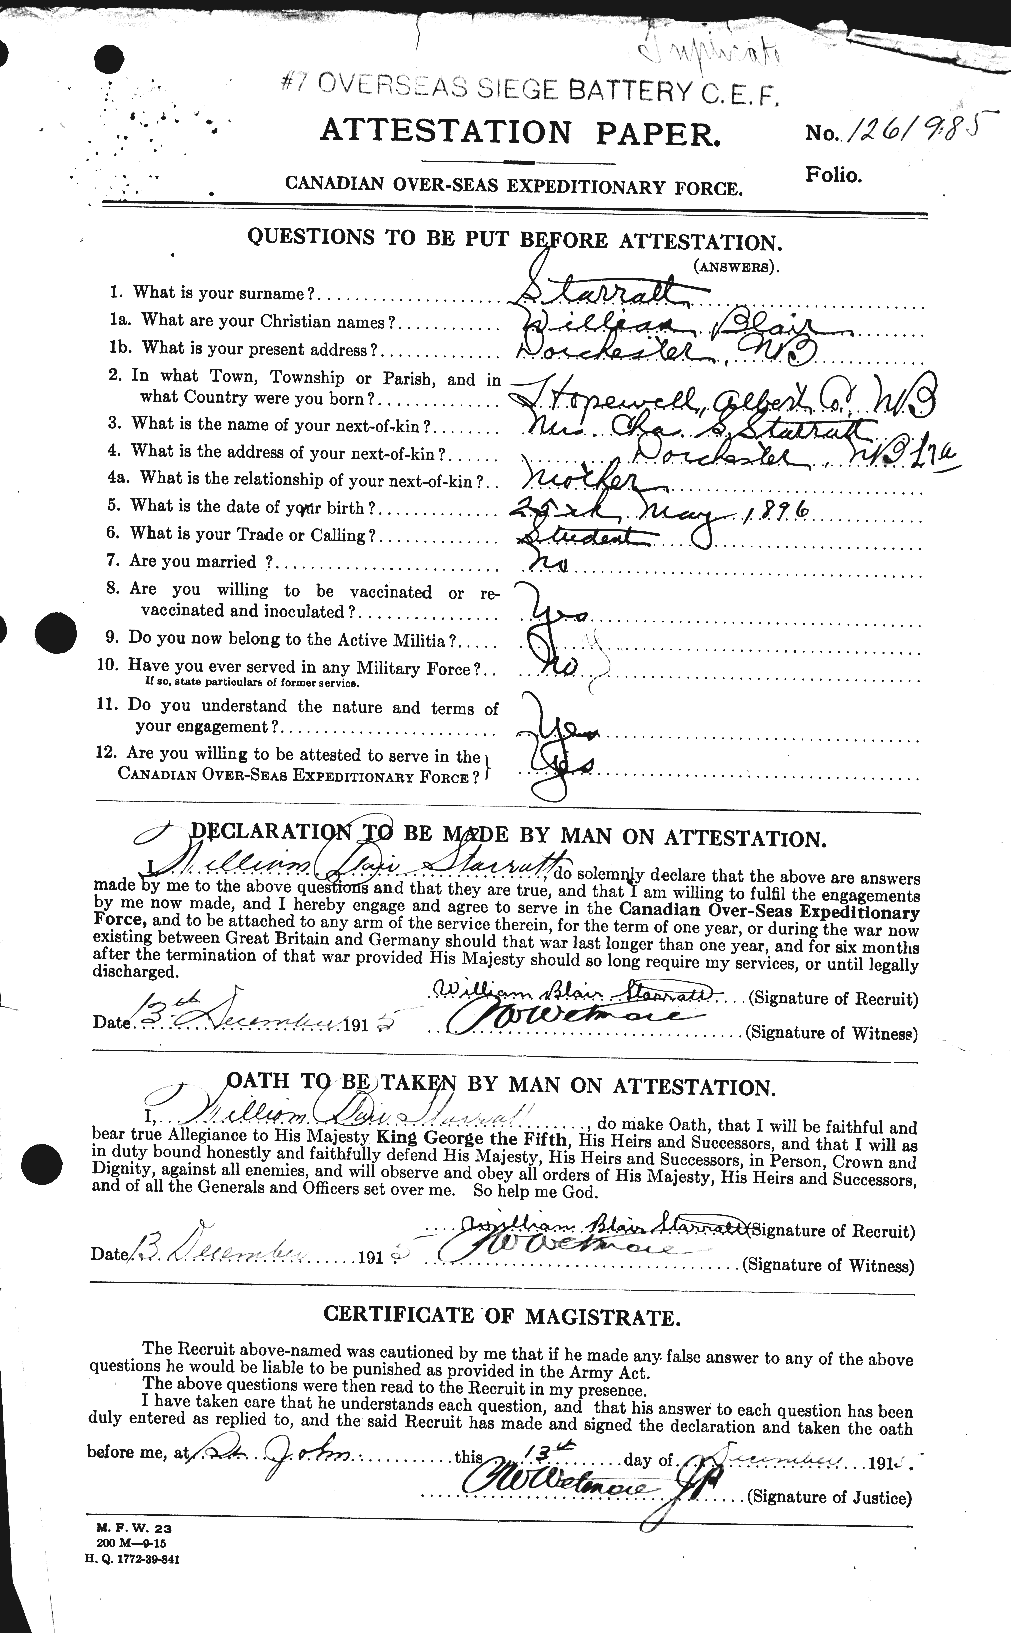 Personnel Records of the First World War - CEF 116408a